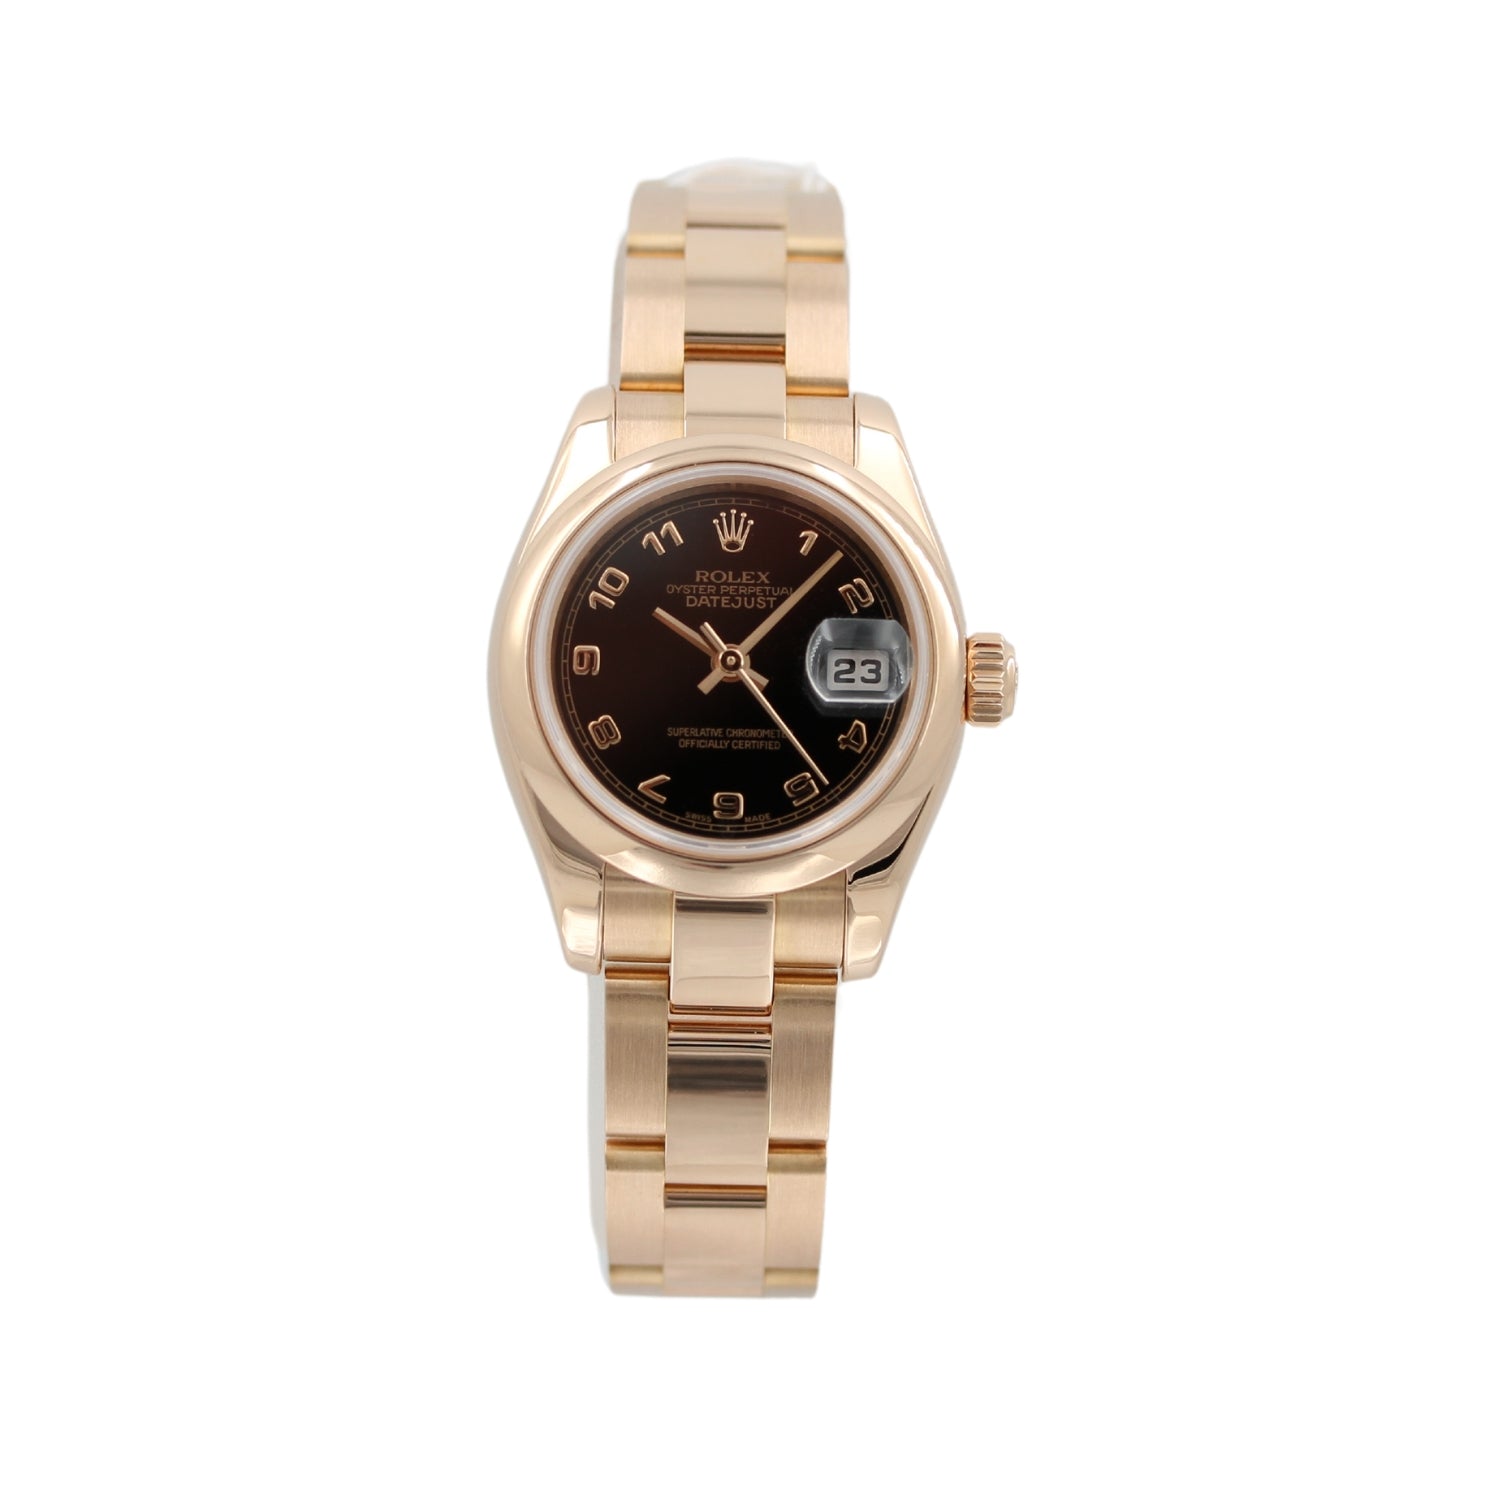 Rolex Lady Datejust 26, Everose Gold, Oyster, Ref. 179165, B+P